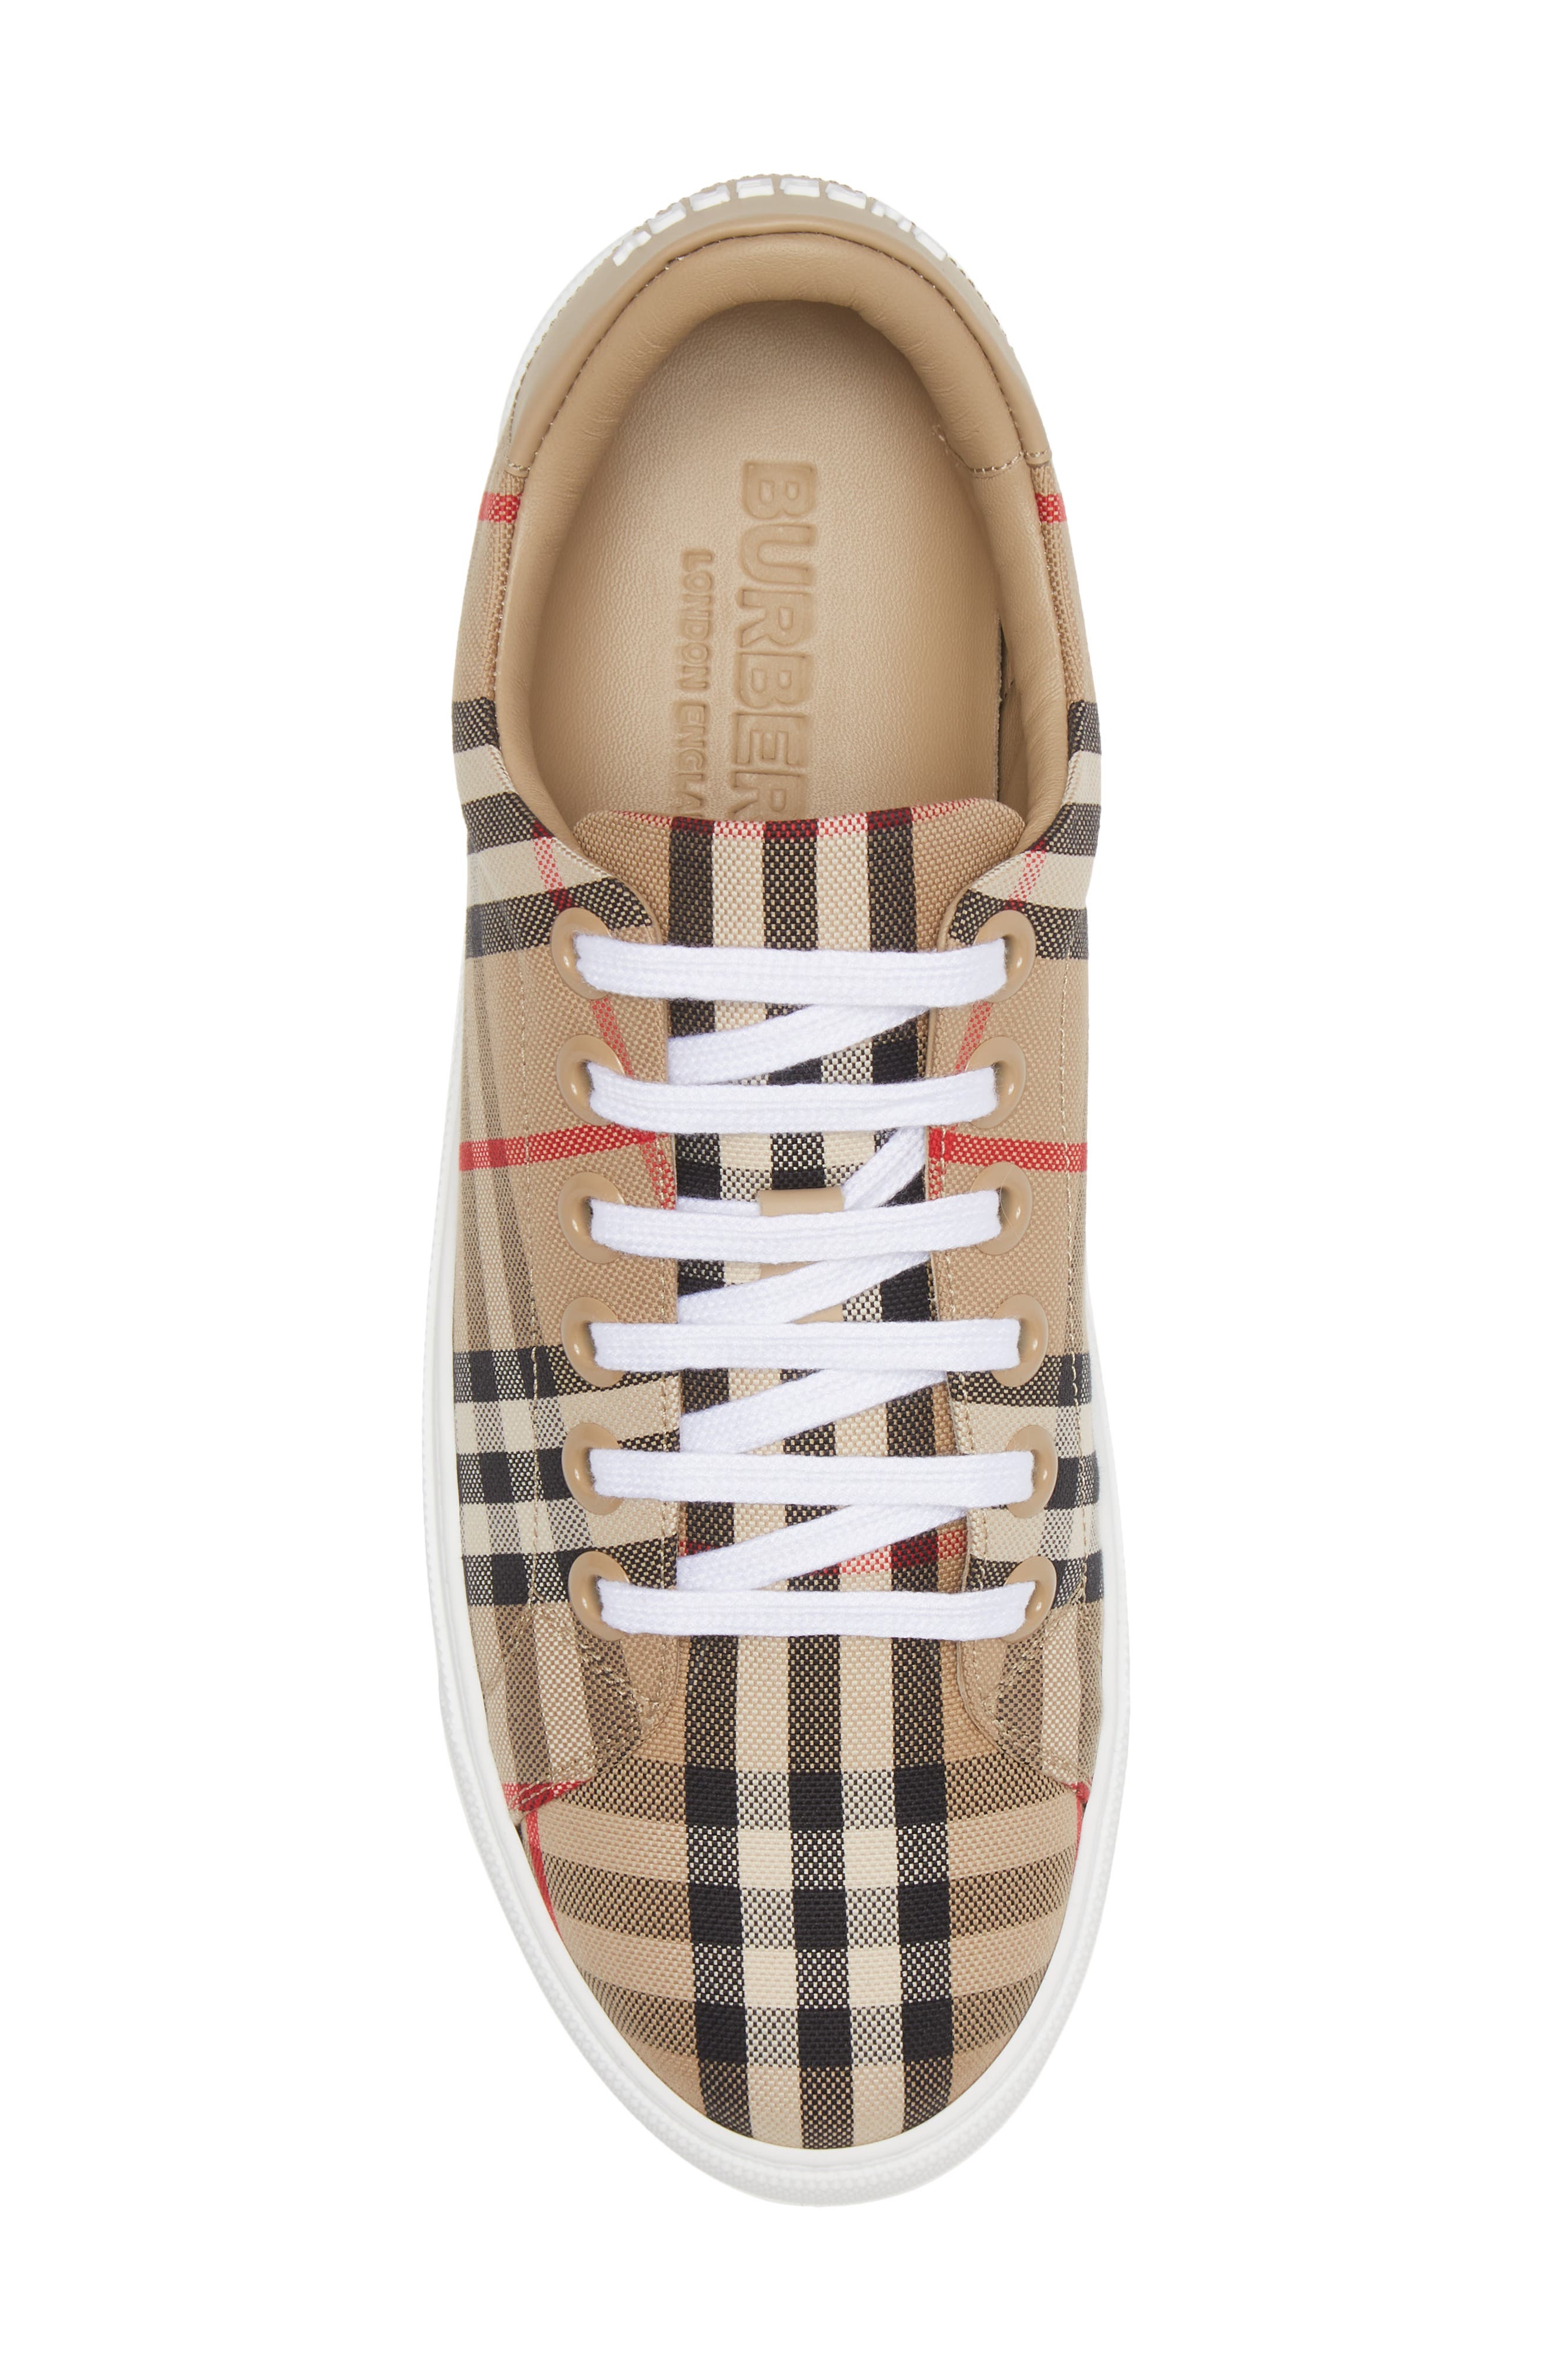 BURBERRY - Vintage Check Leather Sneakers